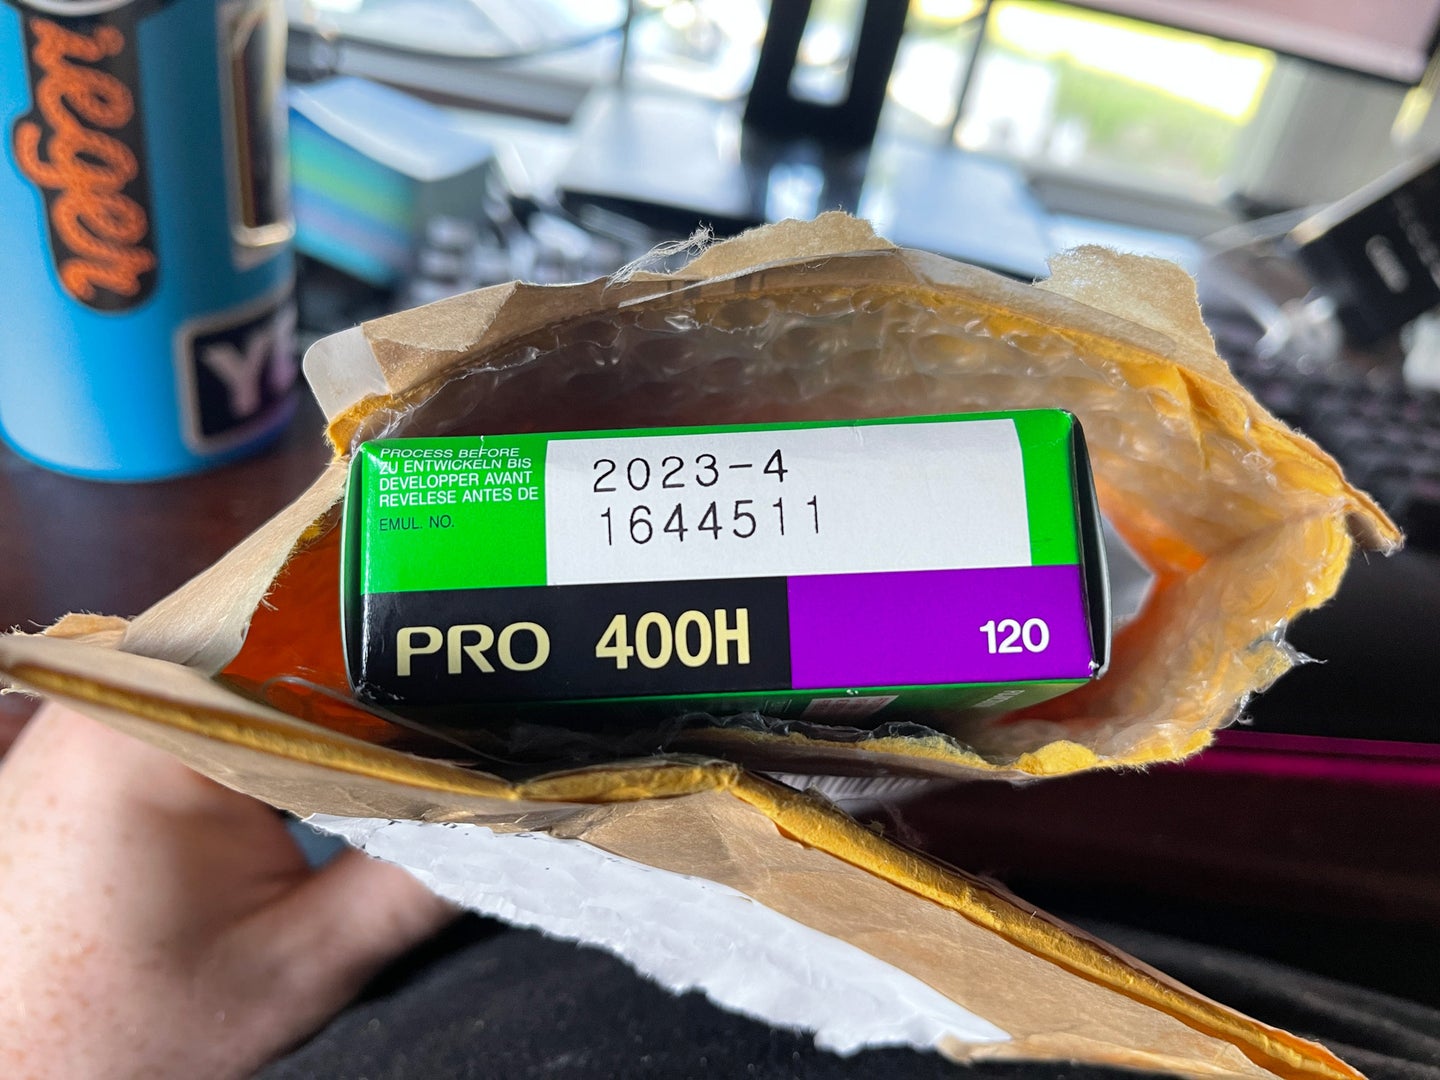 A package ripped open to show a box of film inside